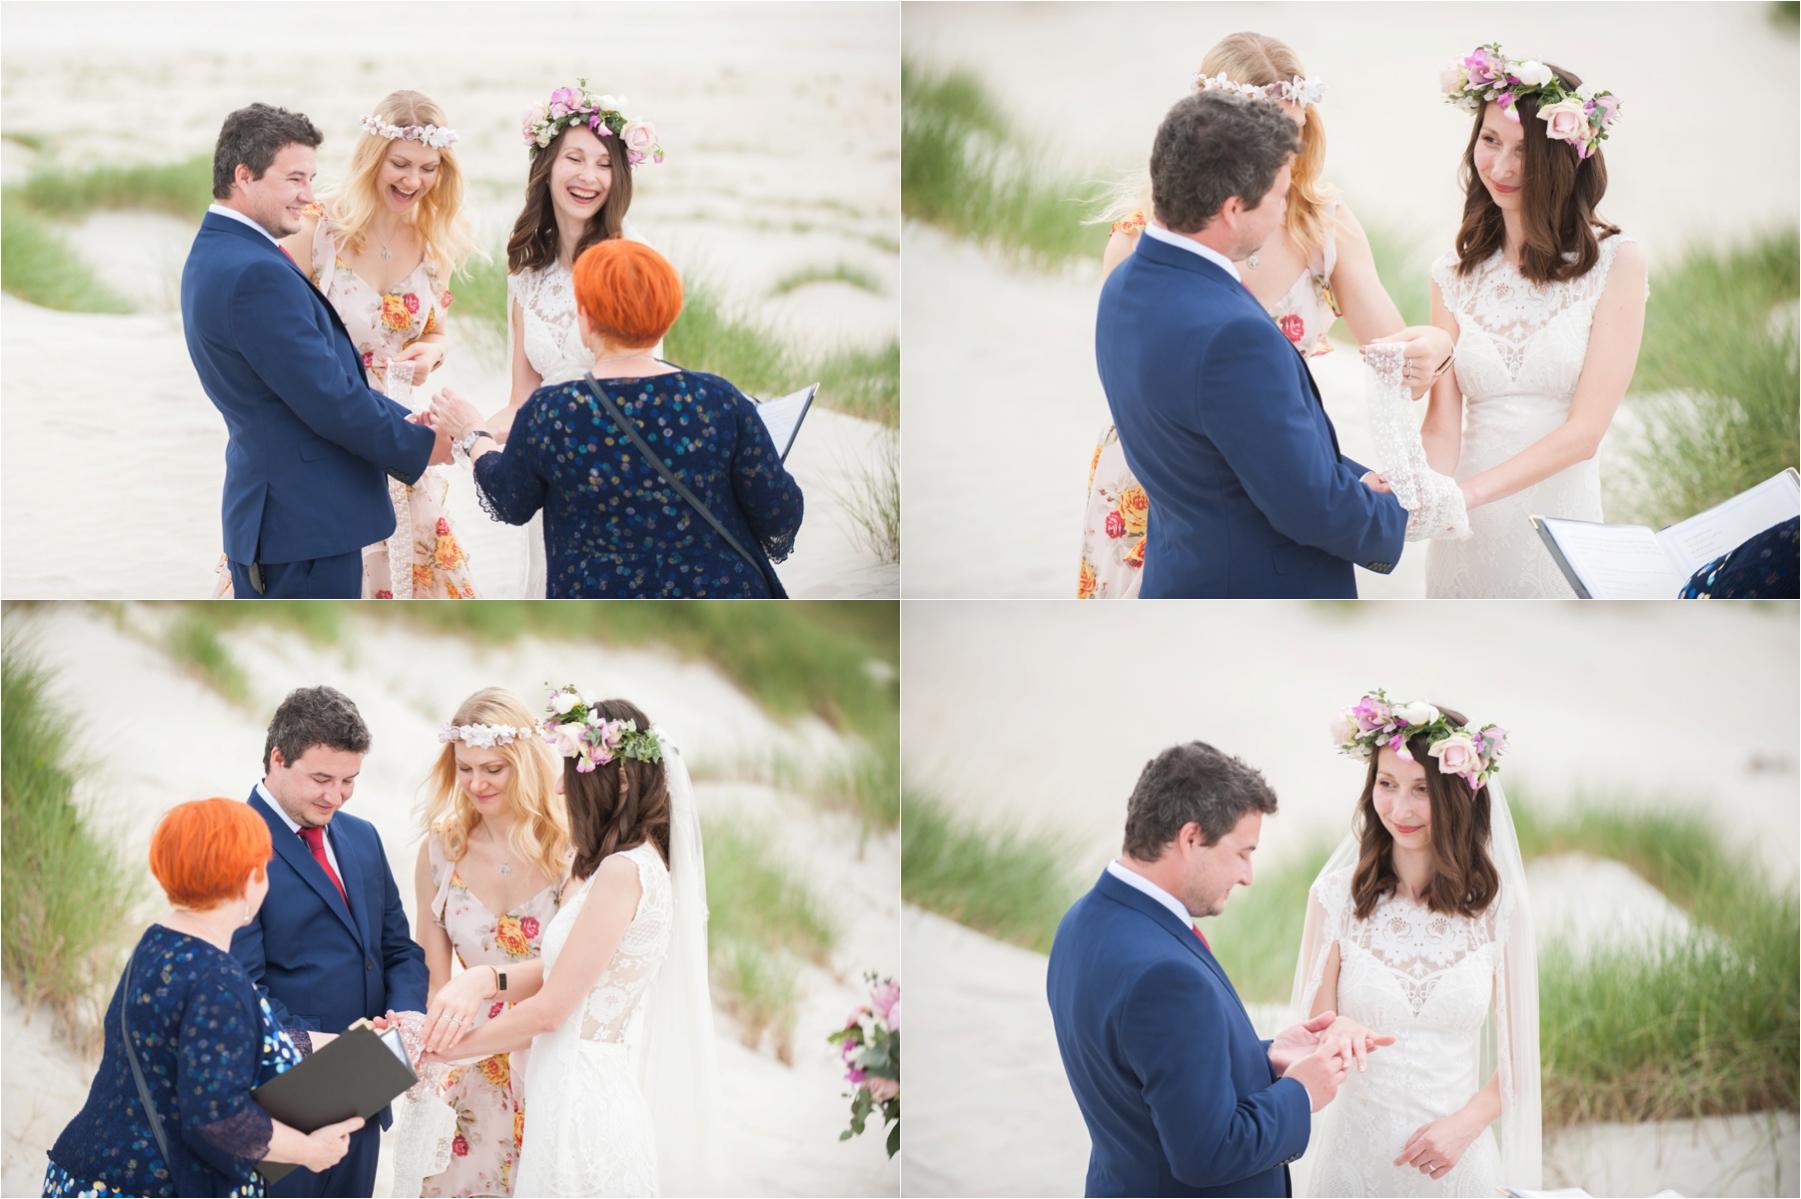 Bride and groom Ilona and Emil exchange rings with two friends as their witnesses. Celebrant Helen Mayer conducted the elopement on Luskentyre Beach.